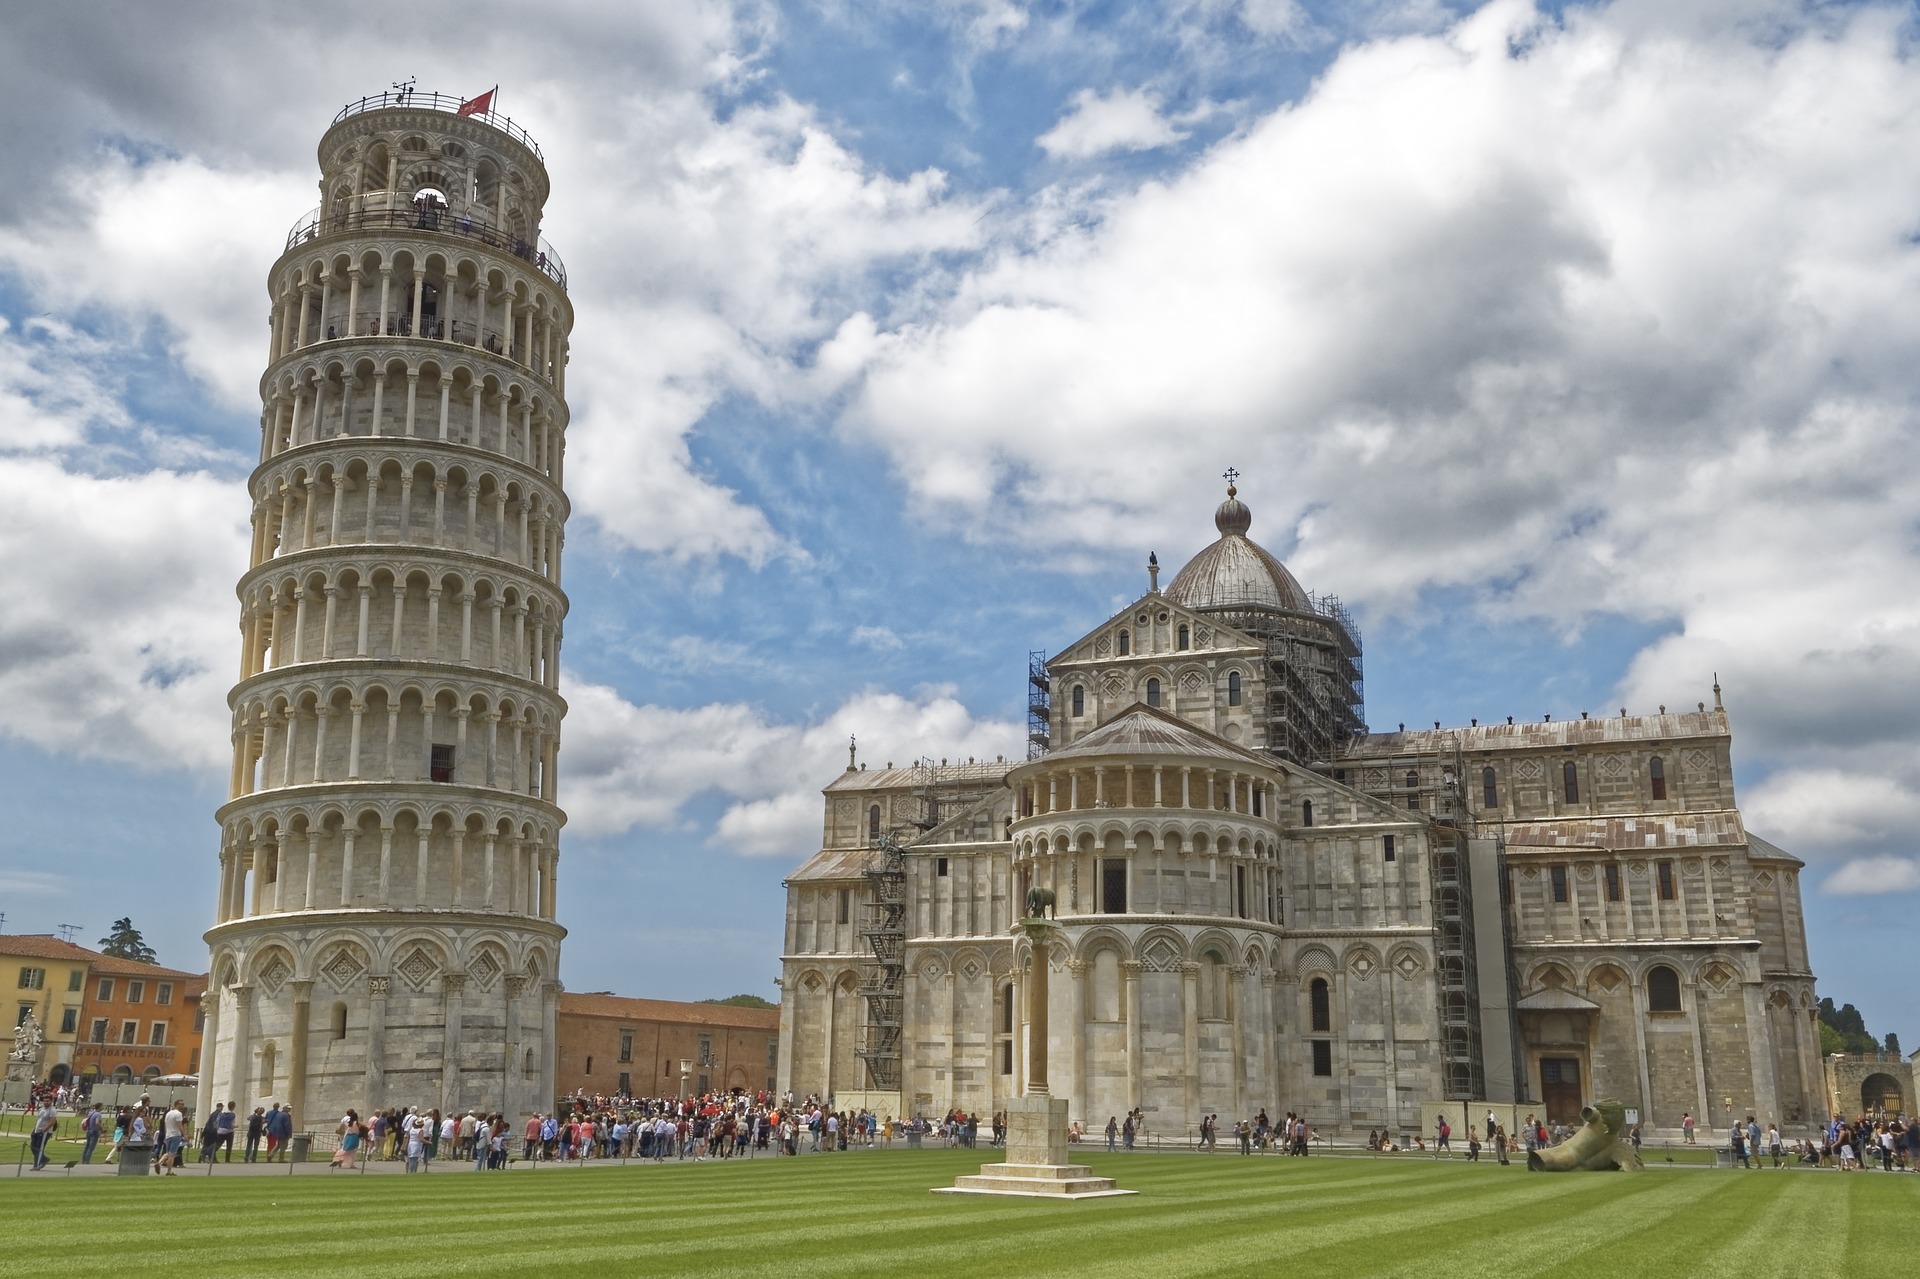 Leaning Tower of Pisa | Today in History